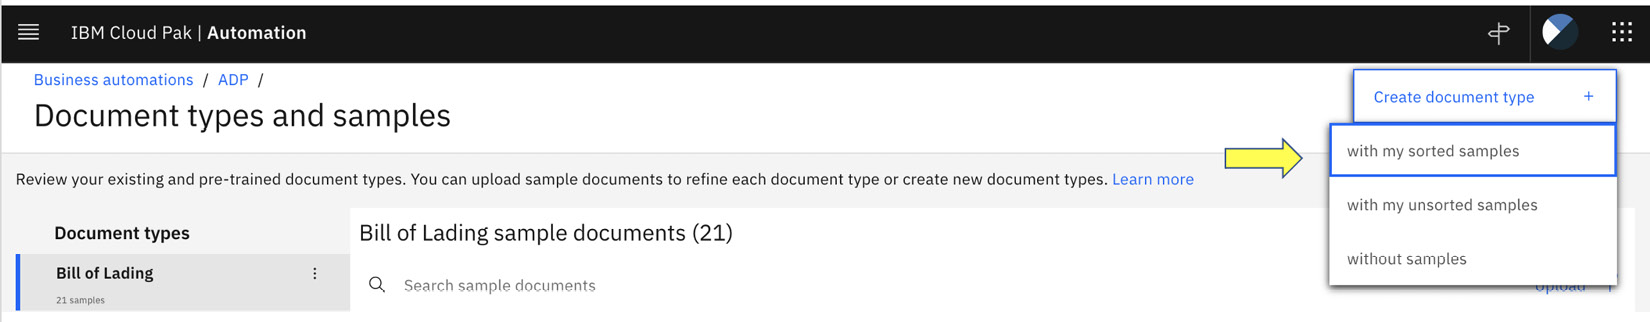 Figure 10.49 – Create document type with samples
